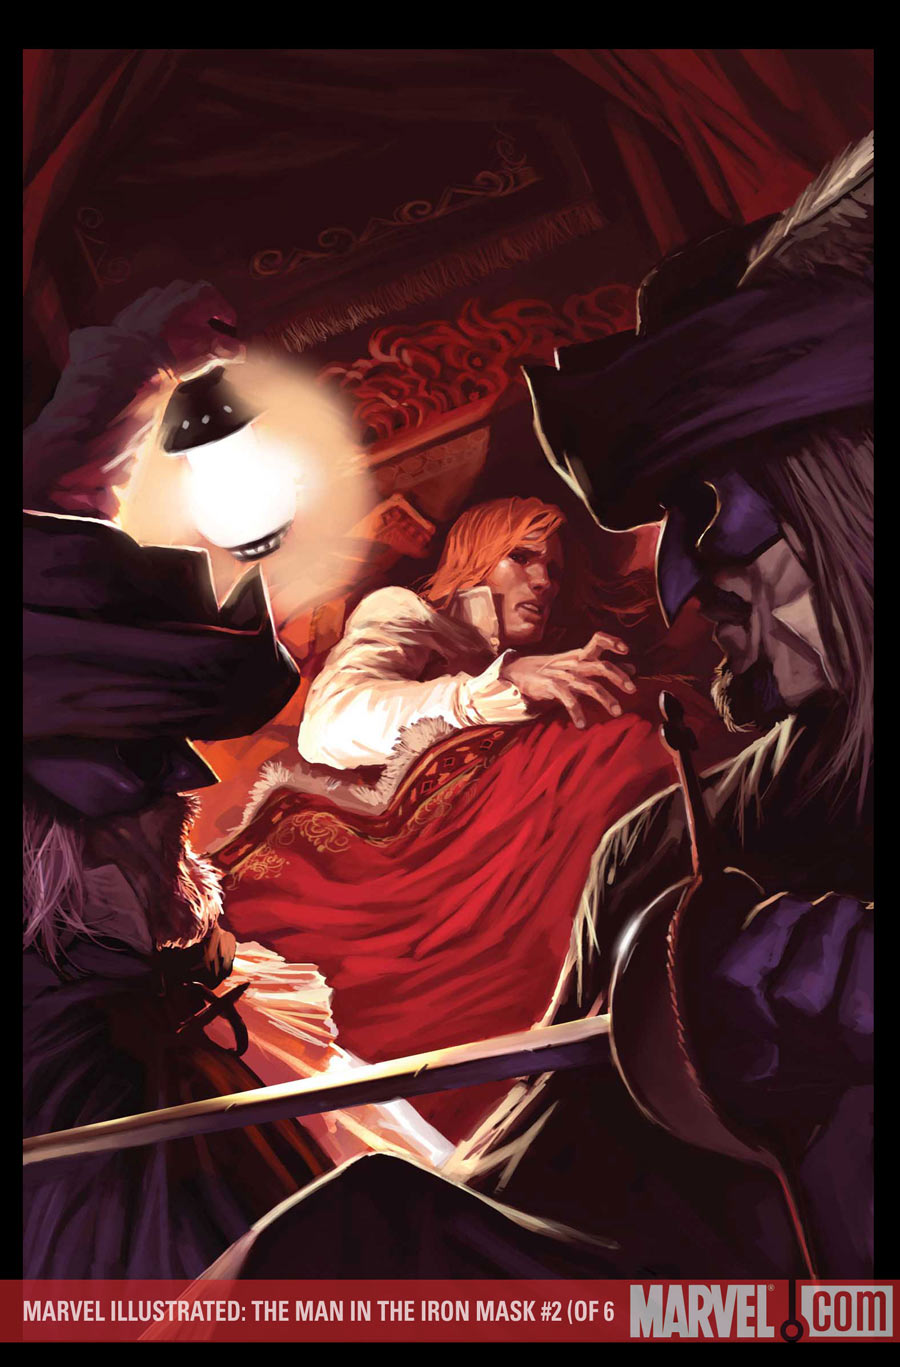 MARVEL ILLUSTRATED: THE MAN IN THE IRON MASK #2 (of 6)